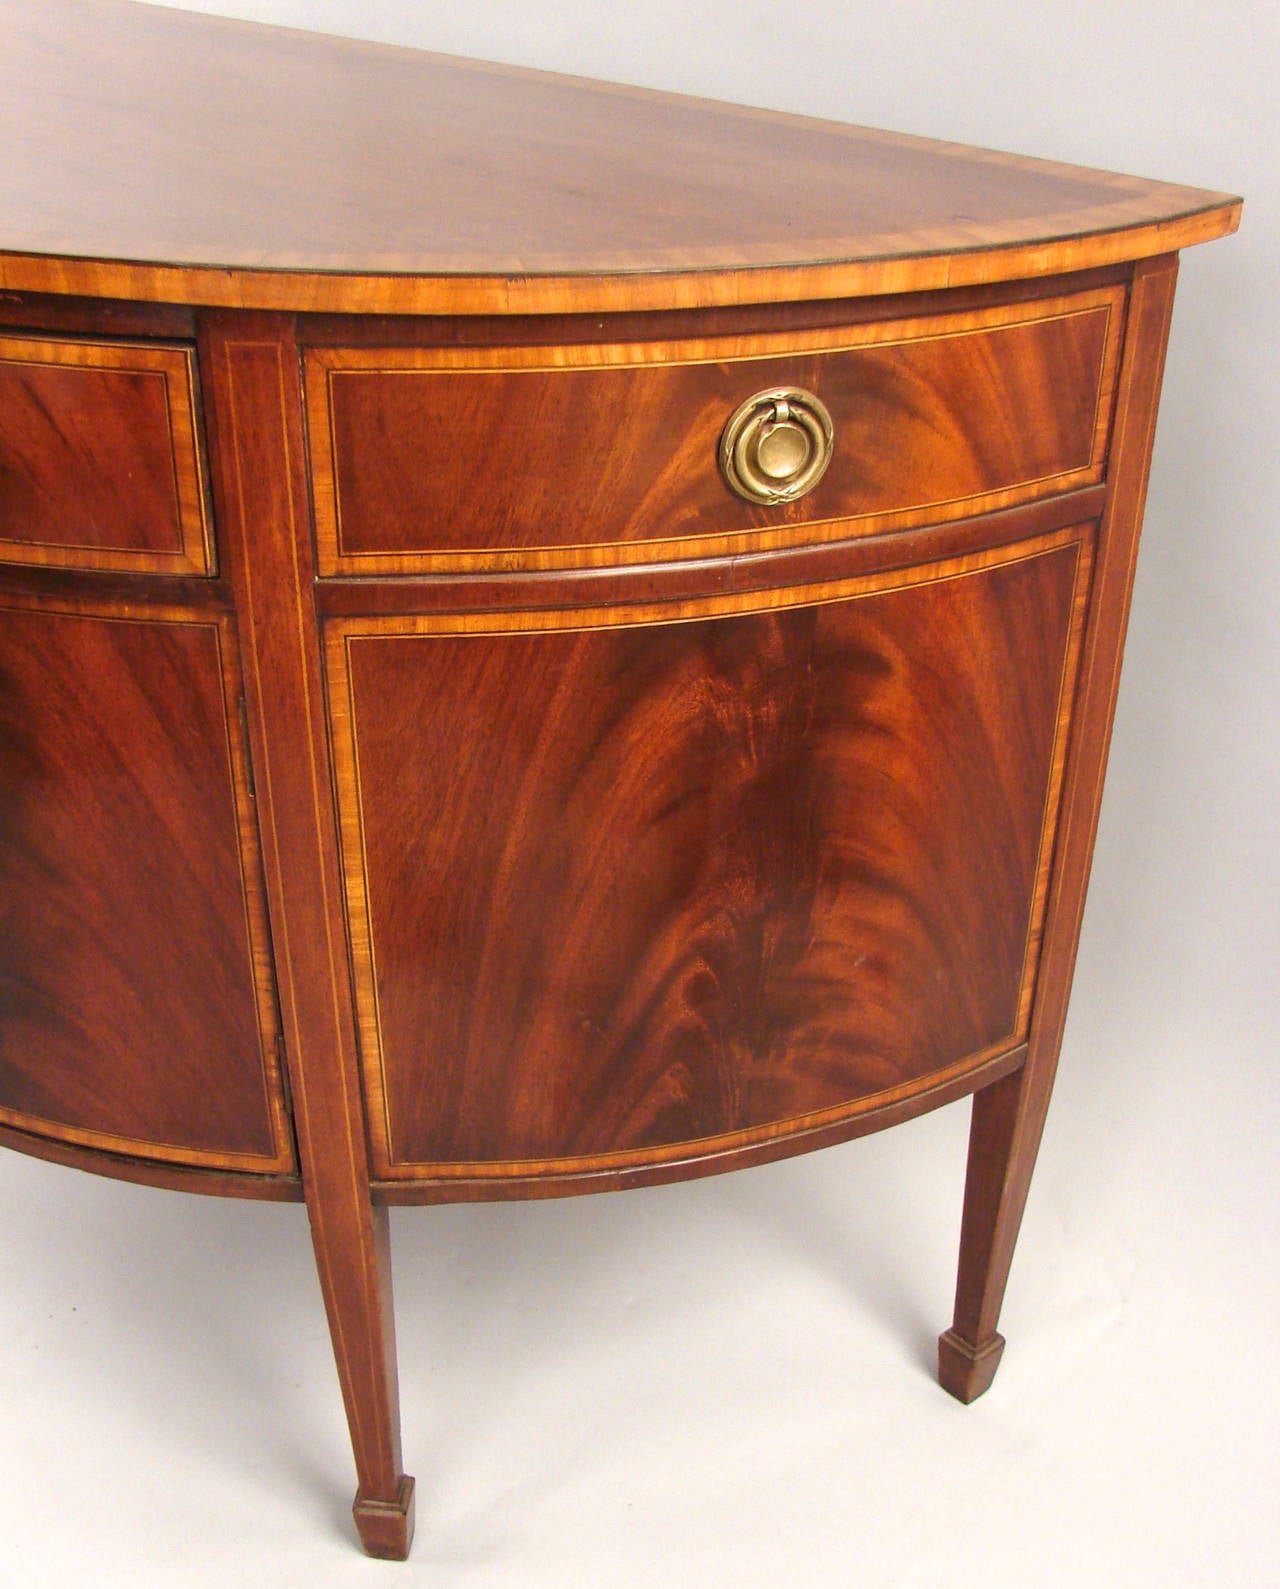 An English Hepplewhite style satinwood inlaid mahogany demilune cabinet, the cross-banded top above one long functional drawer flanked by two false drawers over  figured mahogany cupboard doors, supported by square tapered  legs ending in block